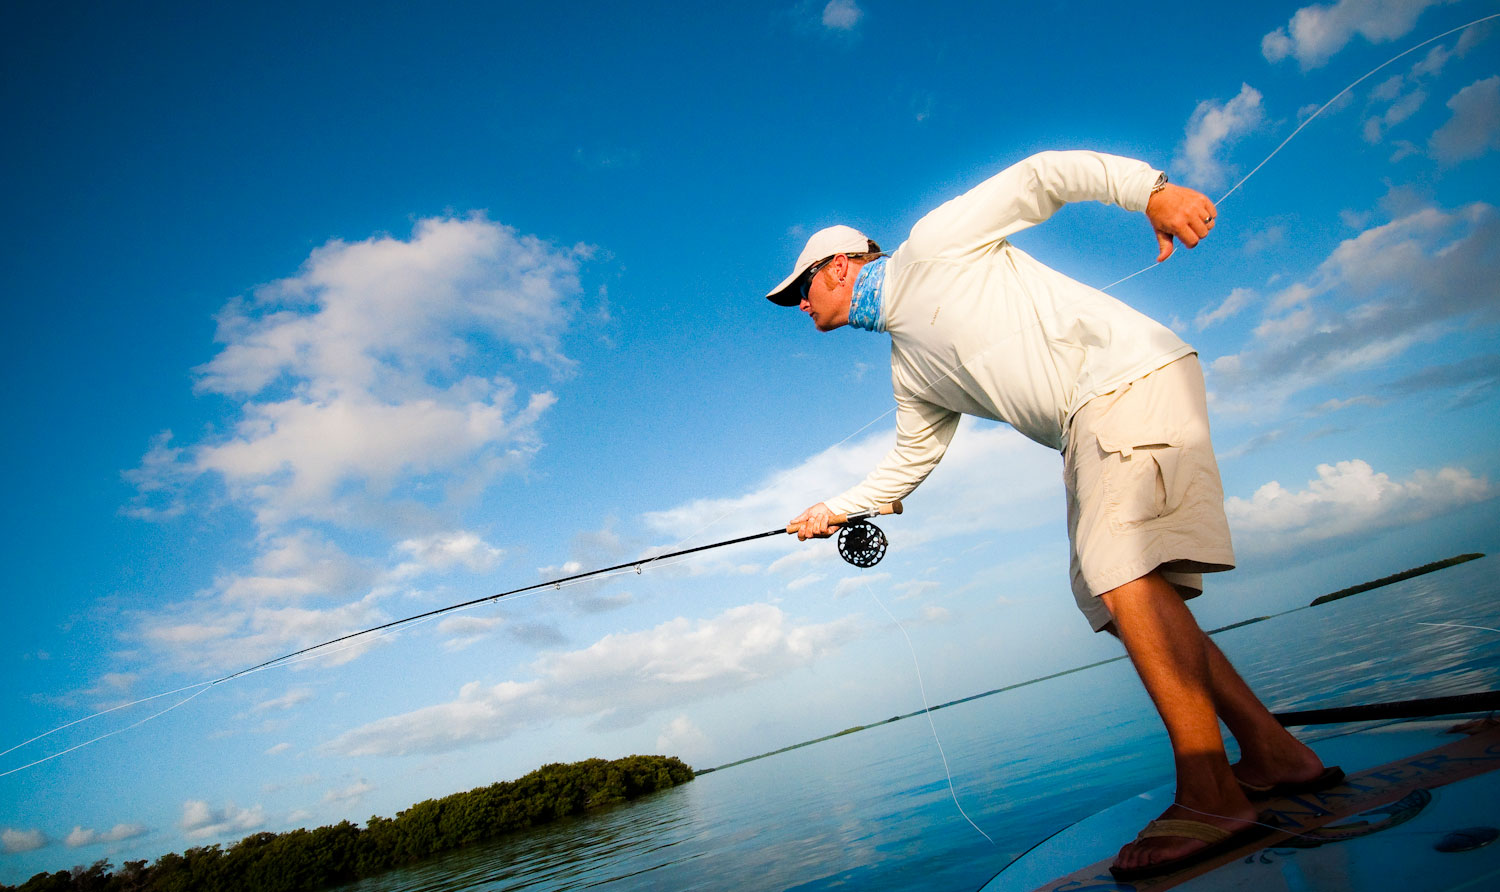 Saltwater Fly Fishing Wallpaper Pictures